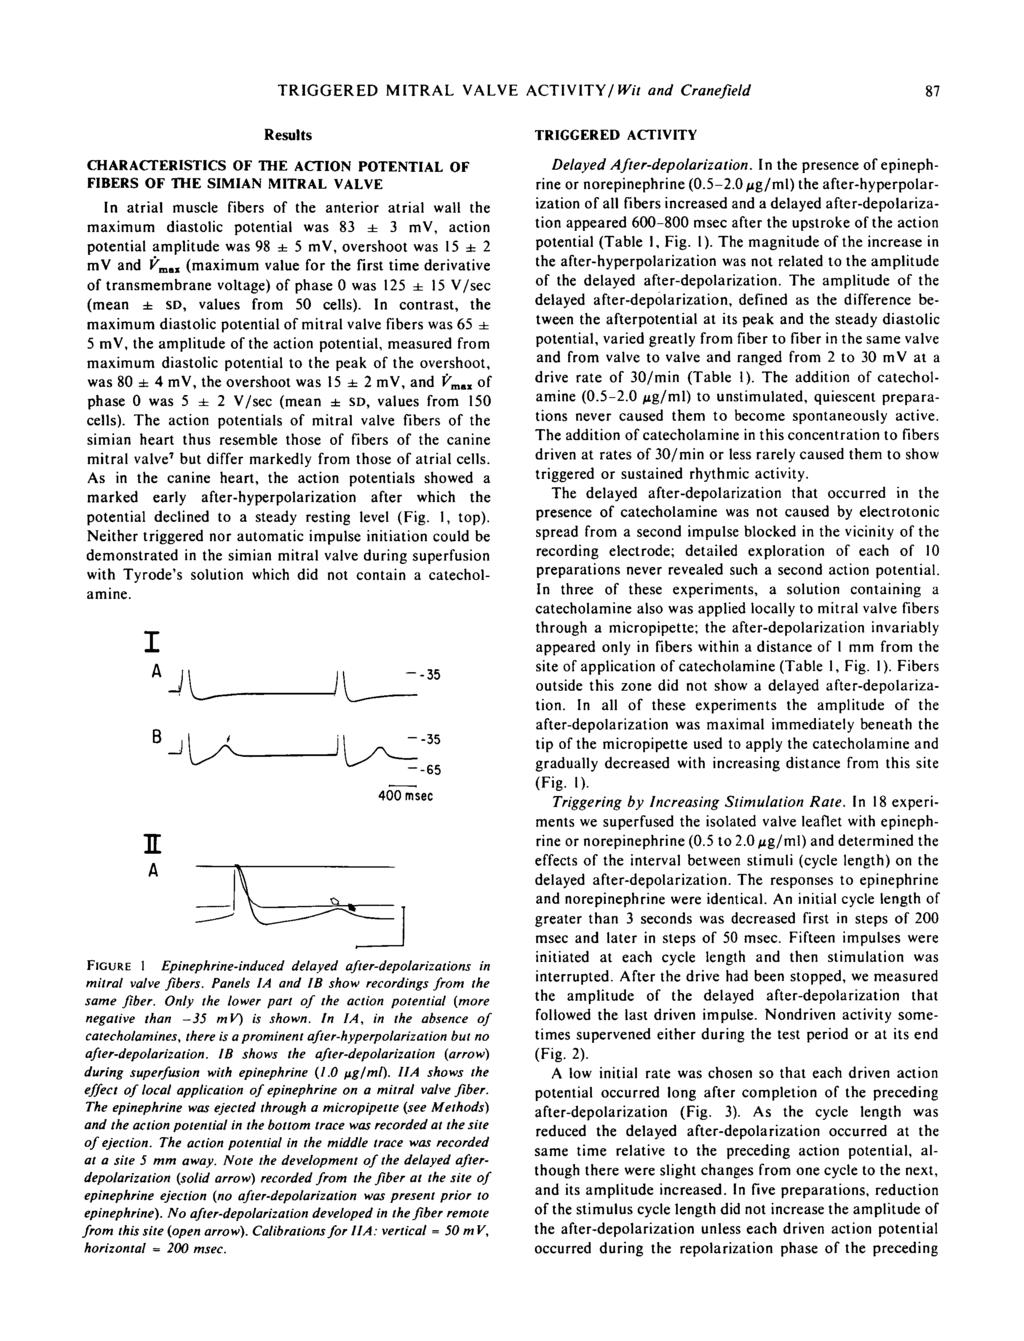 TRIGGERED MITRAL VALVE ACTIVITY/Wit and Cranefield 87 Results CHARACTERISTICS OF THE ACTION POTENTIAL OF FIBERS OF THE SIMIAN MITRAL VALVE In atrial muscle fibers f the anterir atrial wall the